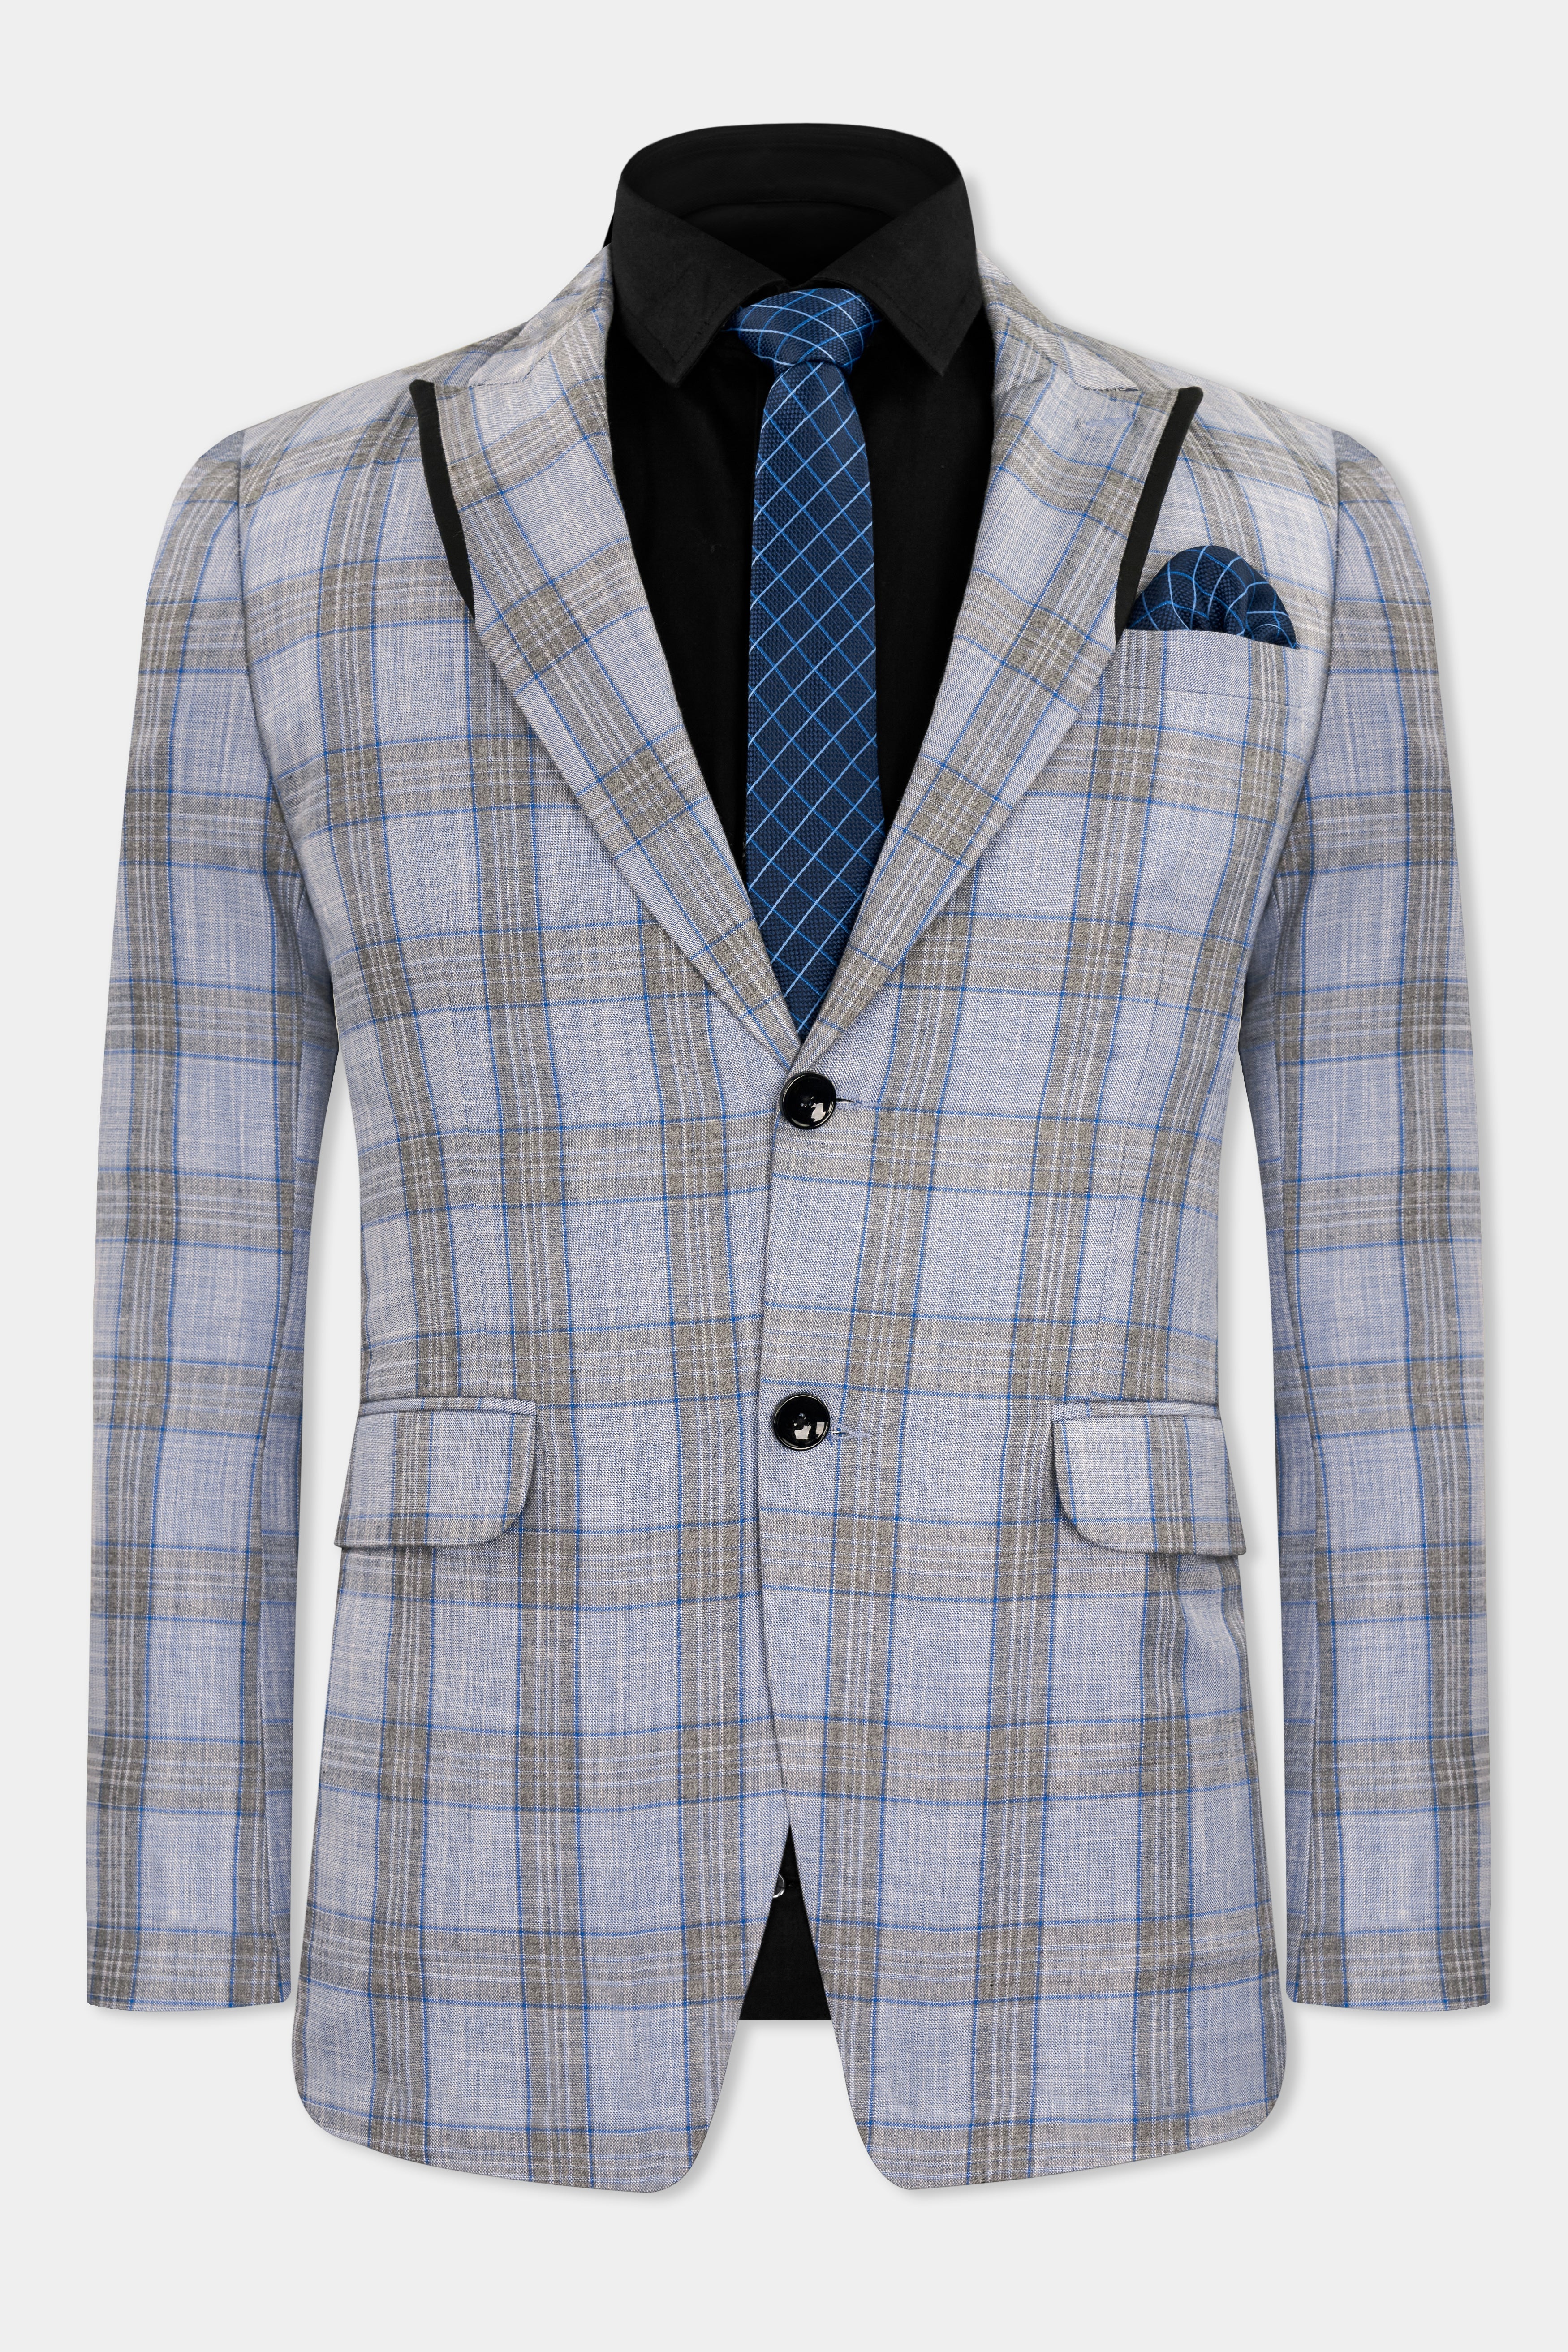 Slate Gray with Tapa Brown Plaid Wool Rich Designer Blazer BL2743-SB-D154-36, BL2743-SB-D154-38, BL2743-SB-D154-40, BL2743-SB-D154-42, BL2743-SB-D154-44, BL2743-SB-D154-46, BL2743-SB-D154-48, BL2743-SB-D154-50, BL2743-SB-D154-52, BL2743-SB-D154-54, BL2743-SB-D154-56, BL2743-SB-D154-58, BL2743-SB-D154-60